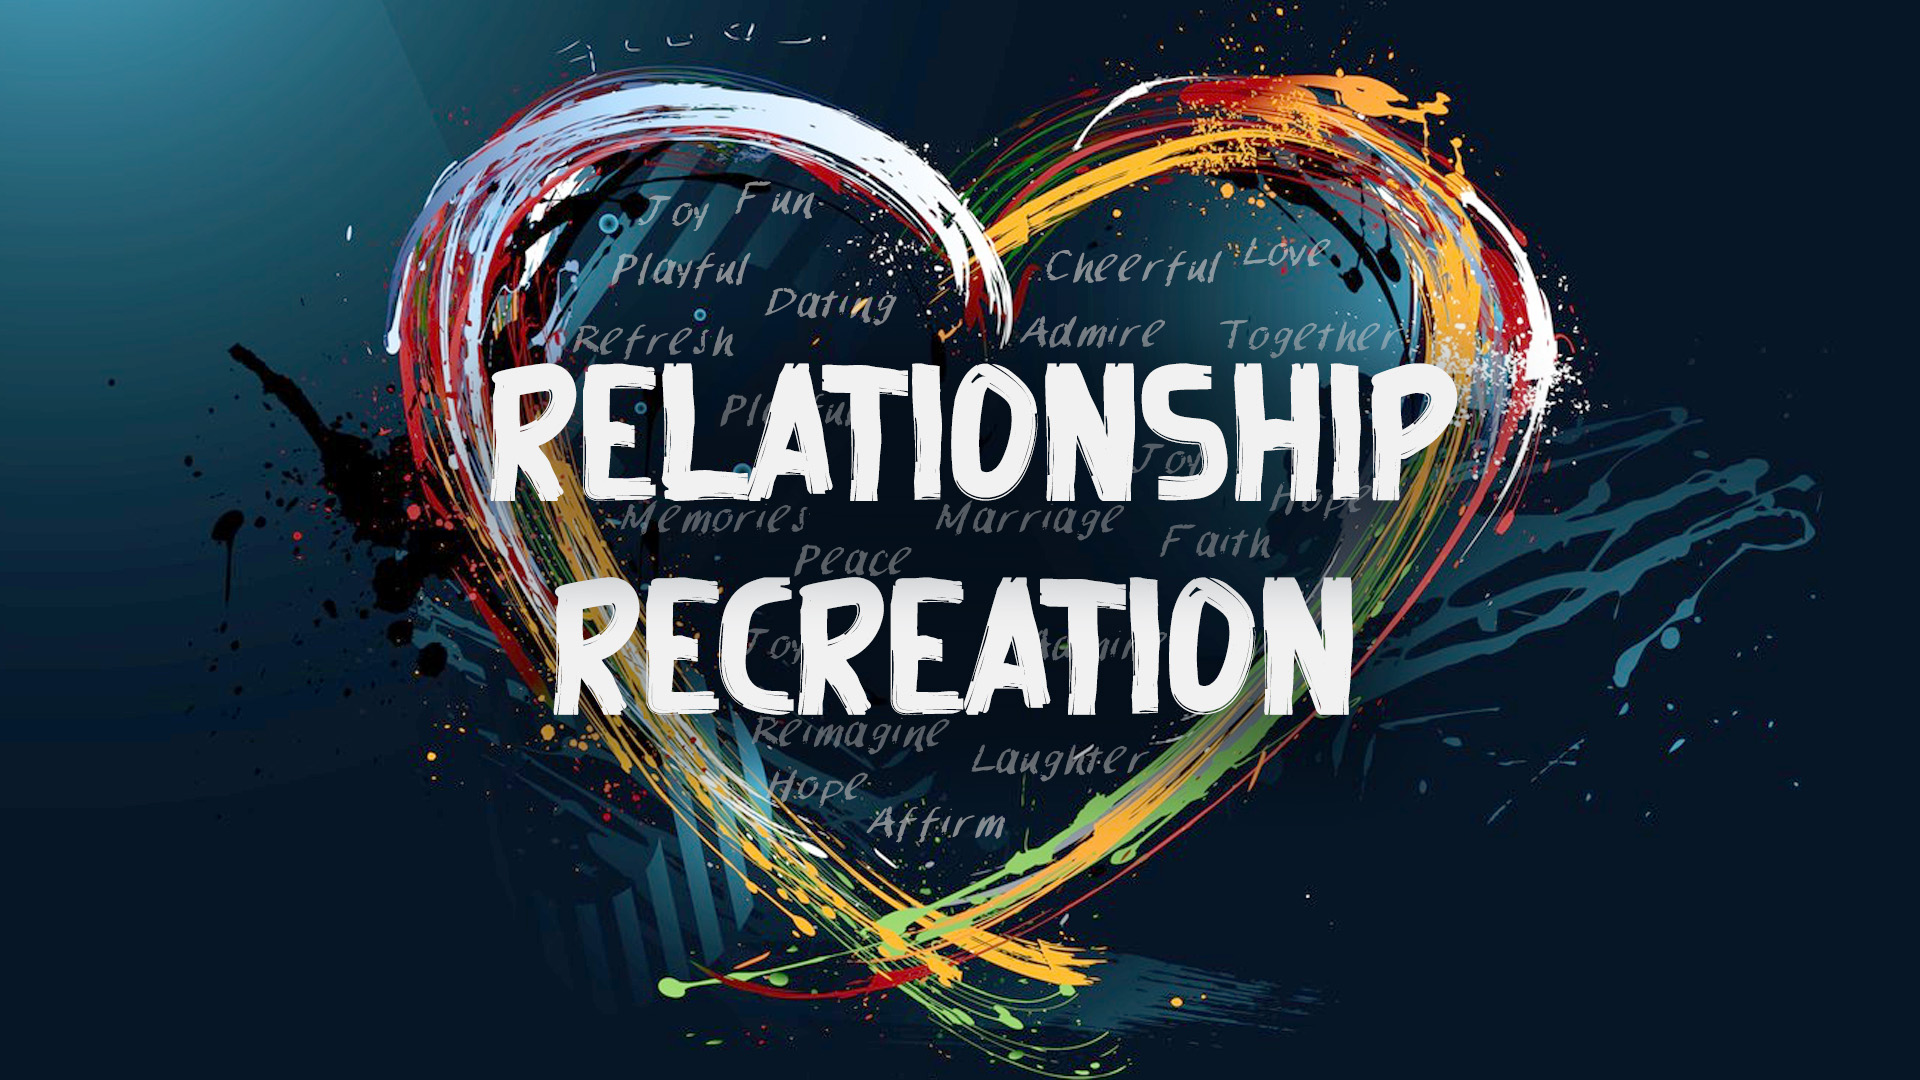 Relationship Re-Creation (For Couples)

Quarterly Meetings
Sunday | 11:00am
June 23
Childcare Provided
